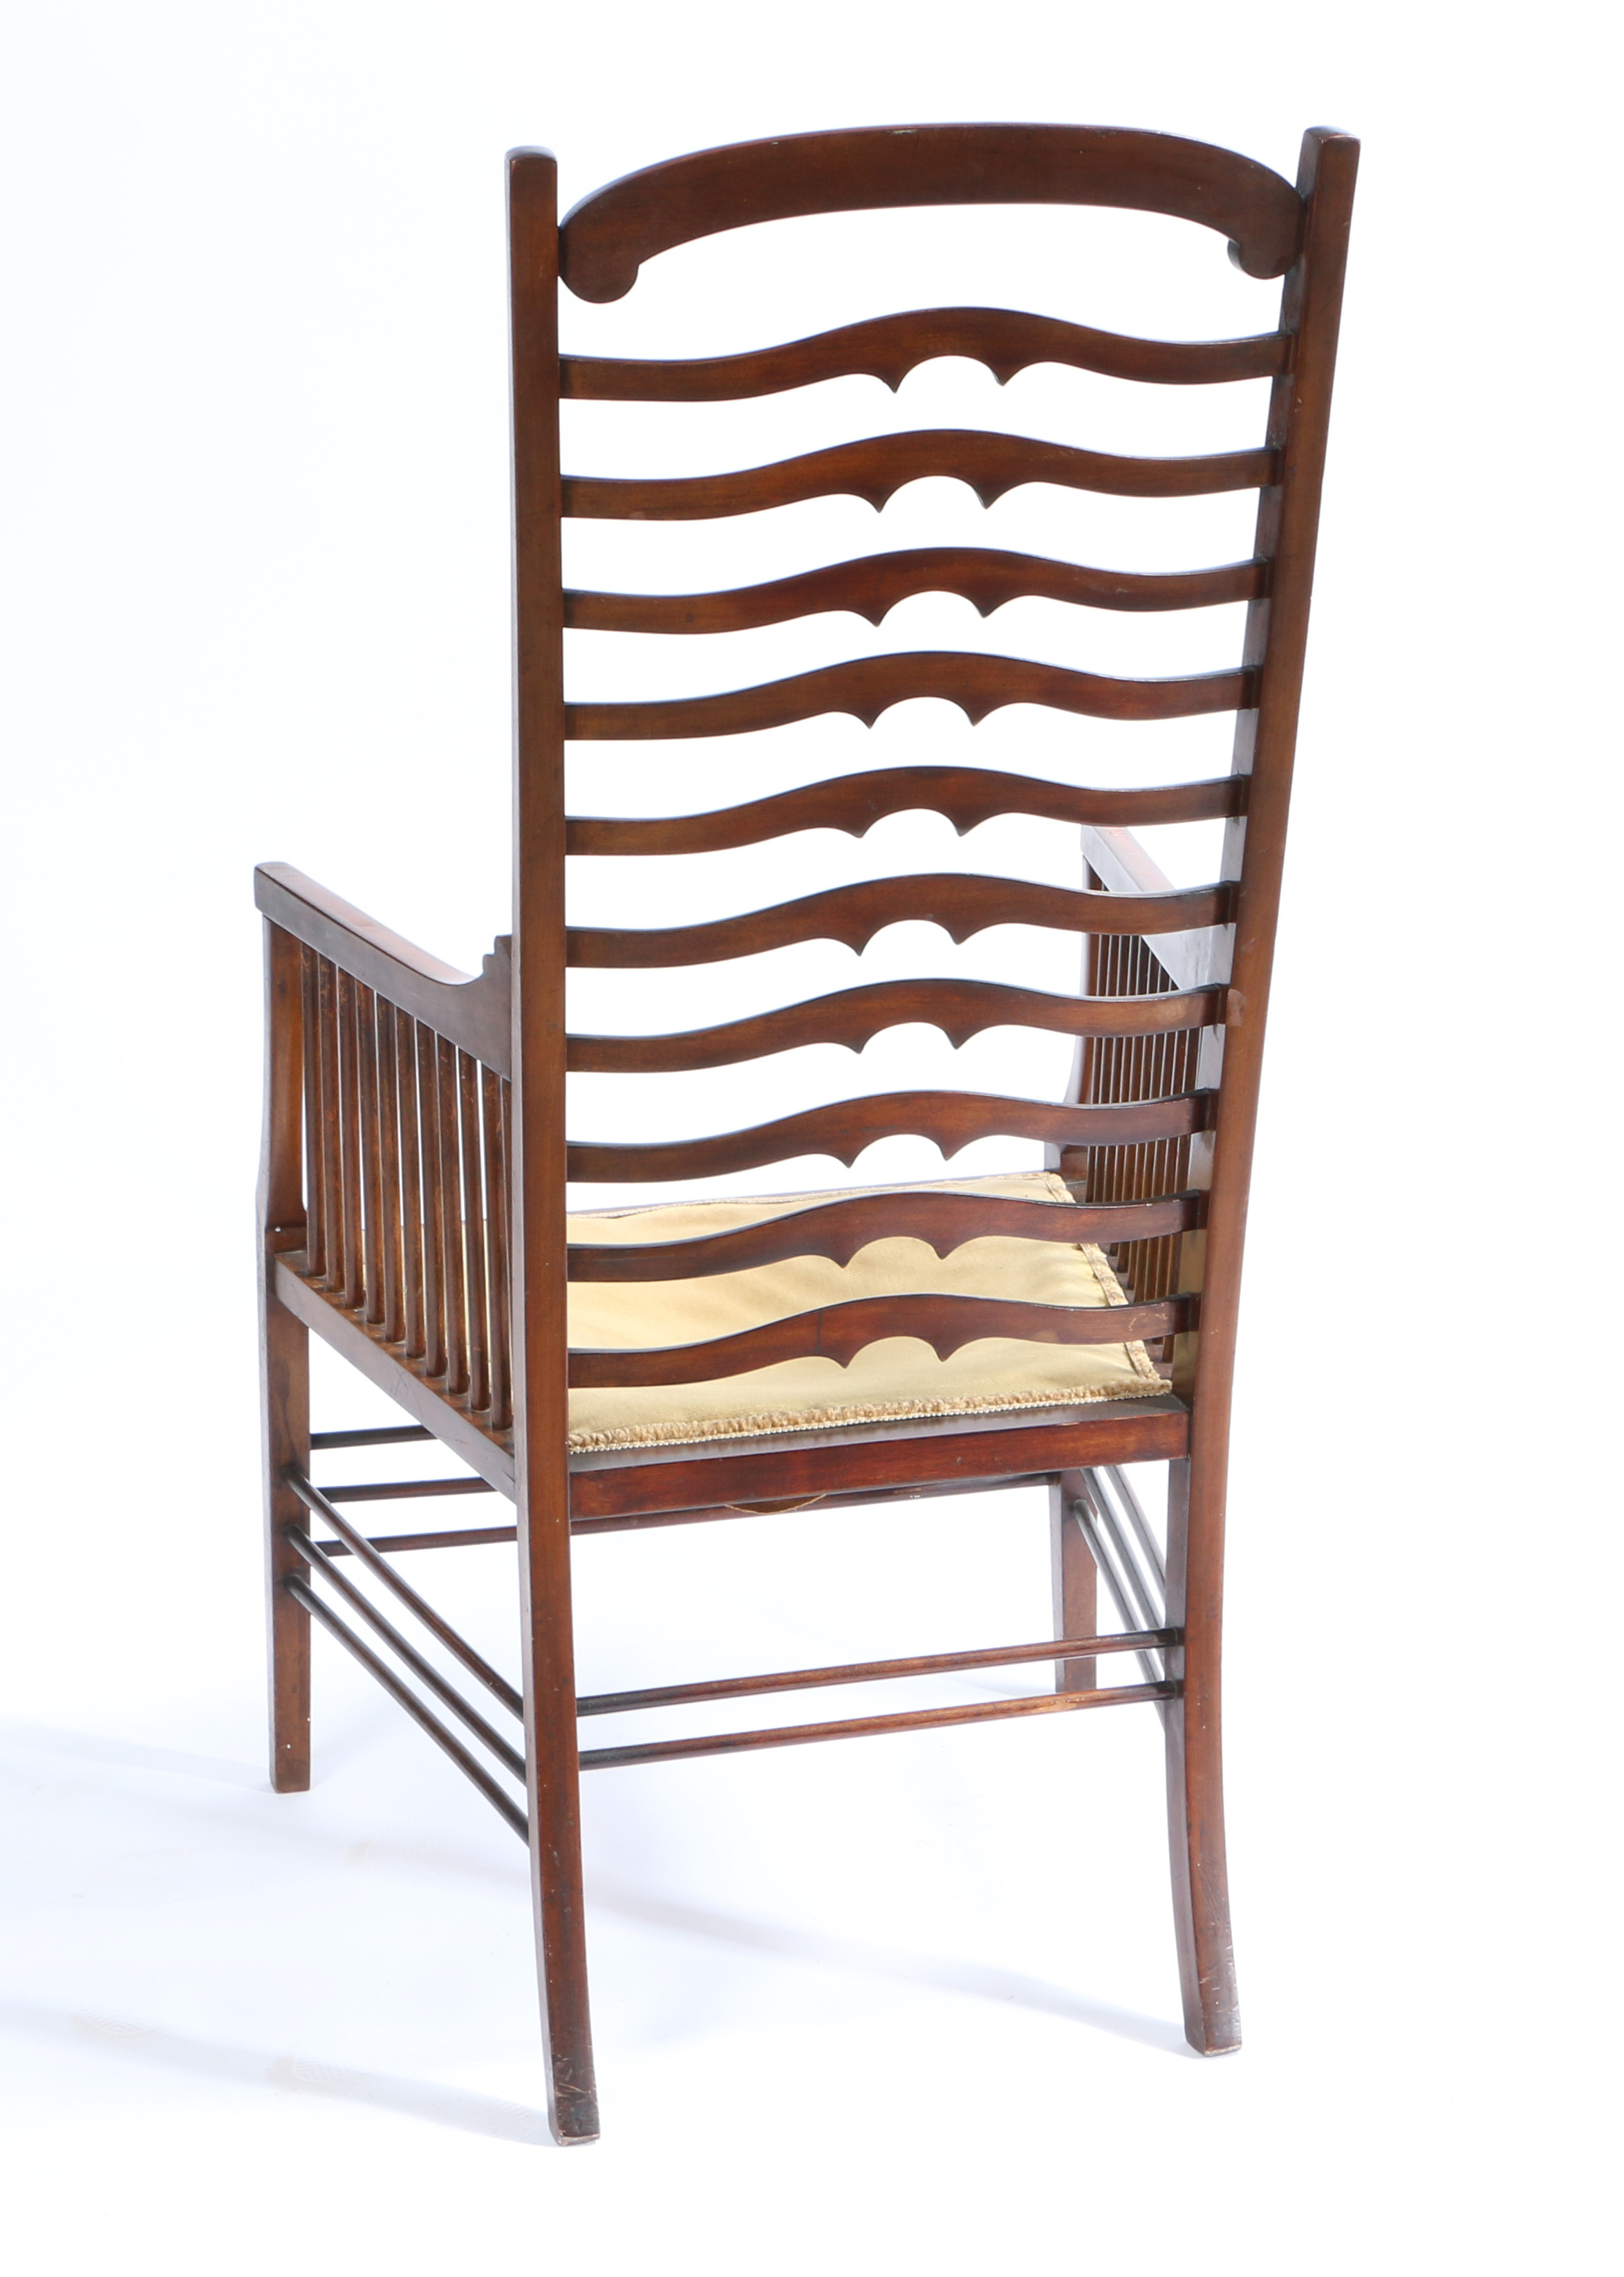 AN ARTS AND CRAFTS LADDER BACK CHAIR. - Image 4 of 4